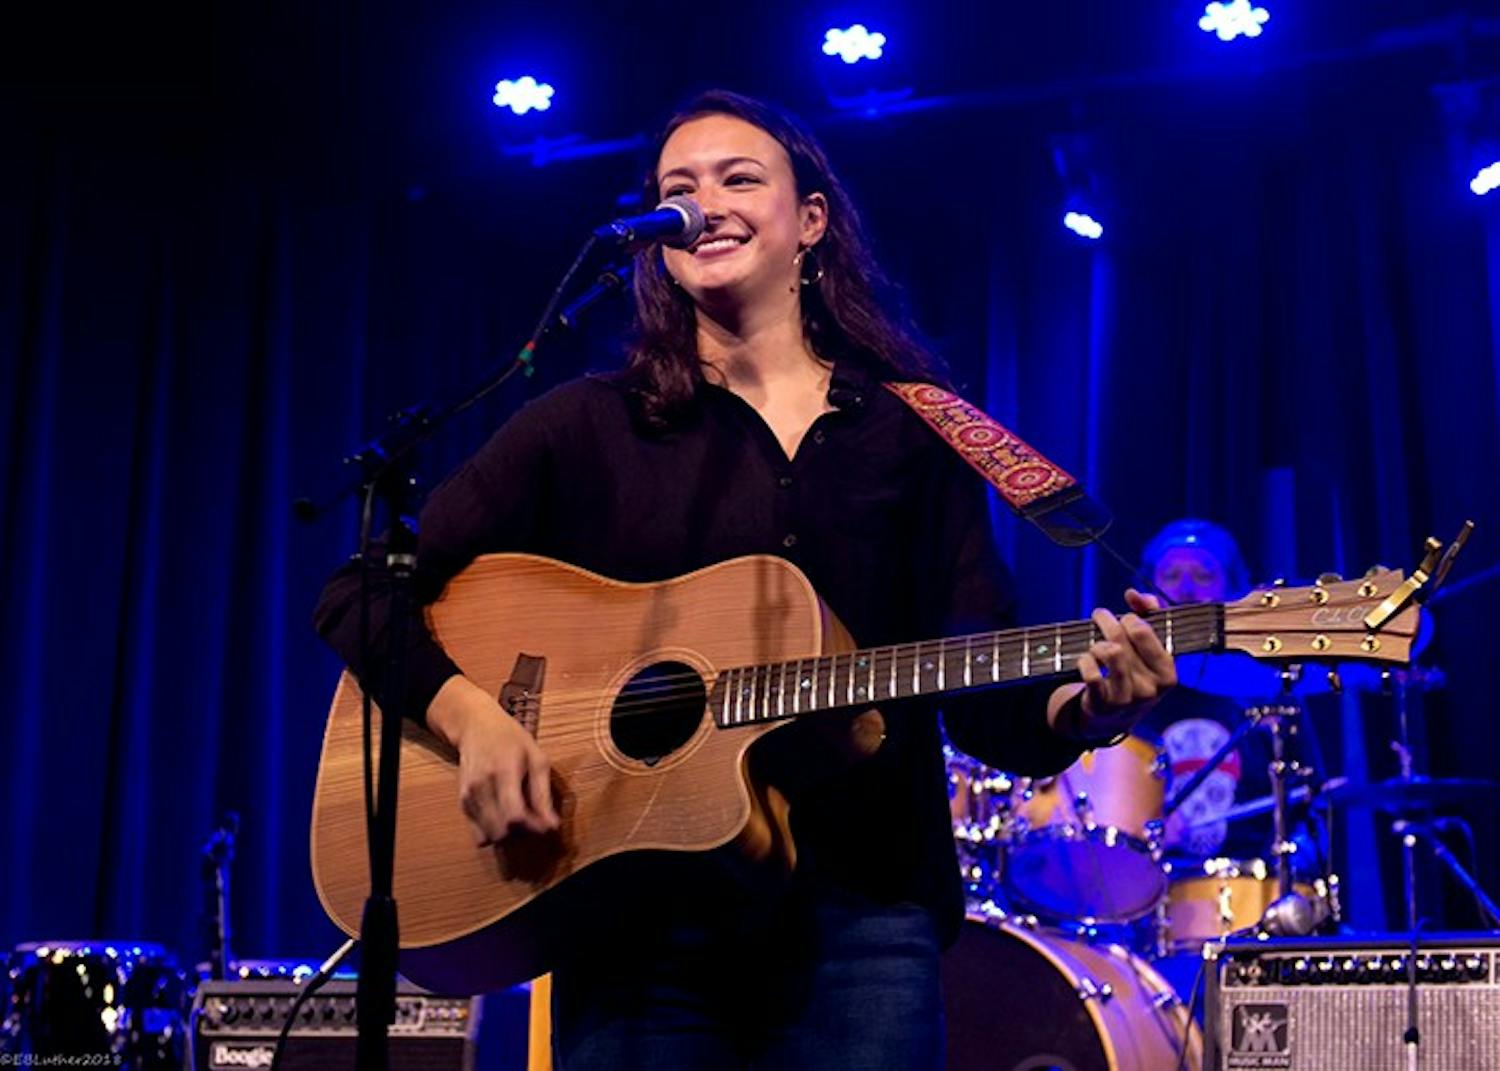 Mia Green performed in July 2018 at Isis Music Hall in Asheville, North Carolina. The songs she performed were released on her “Paper Days” album.